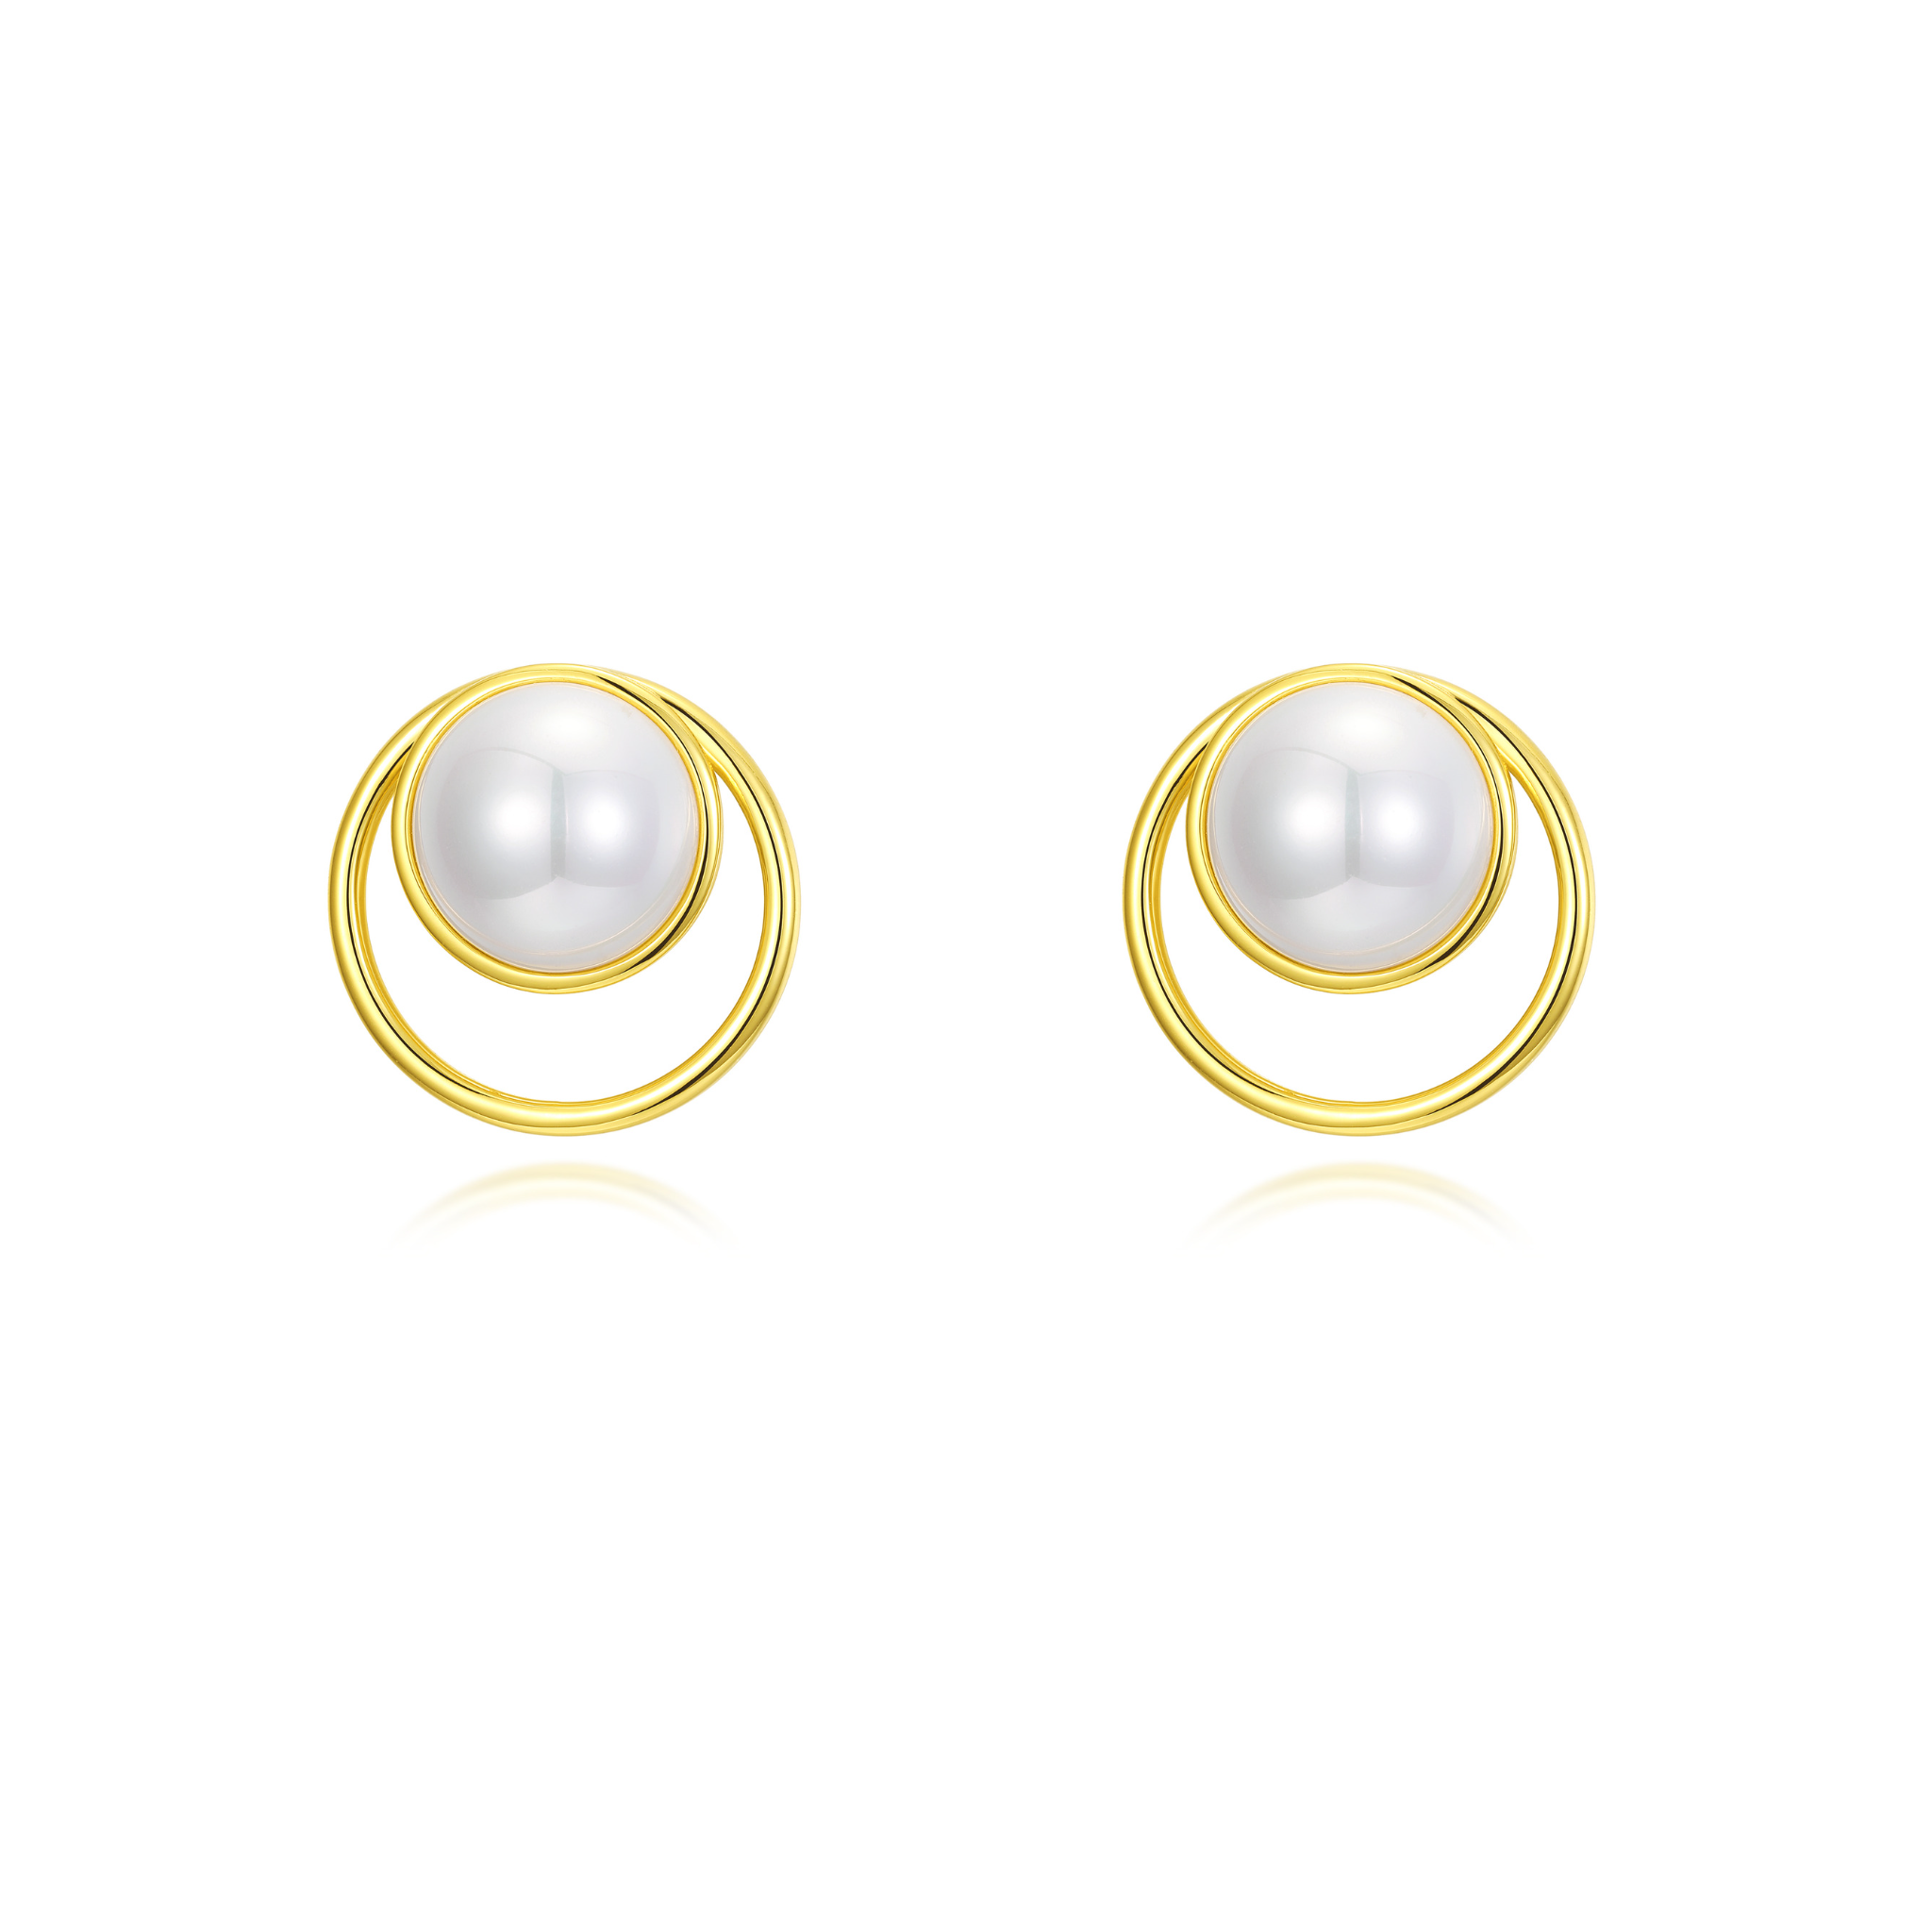 Double Circle Pearl Stud Earrings - L'Amour Pearls